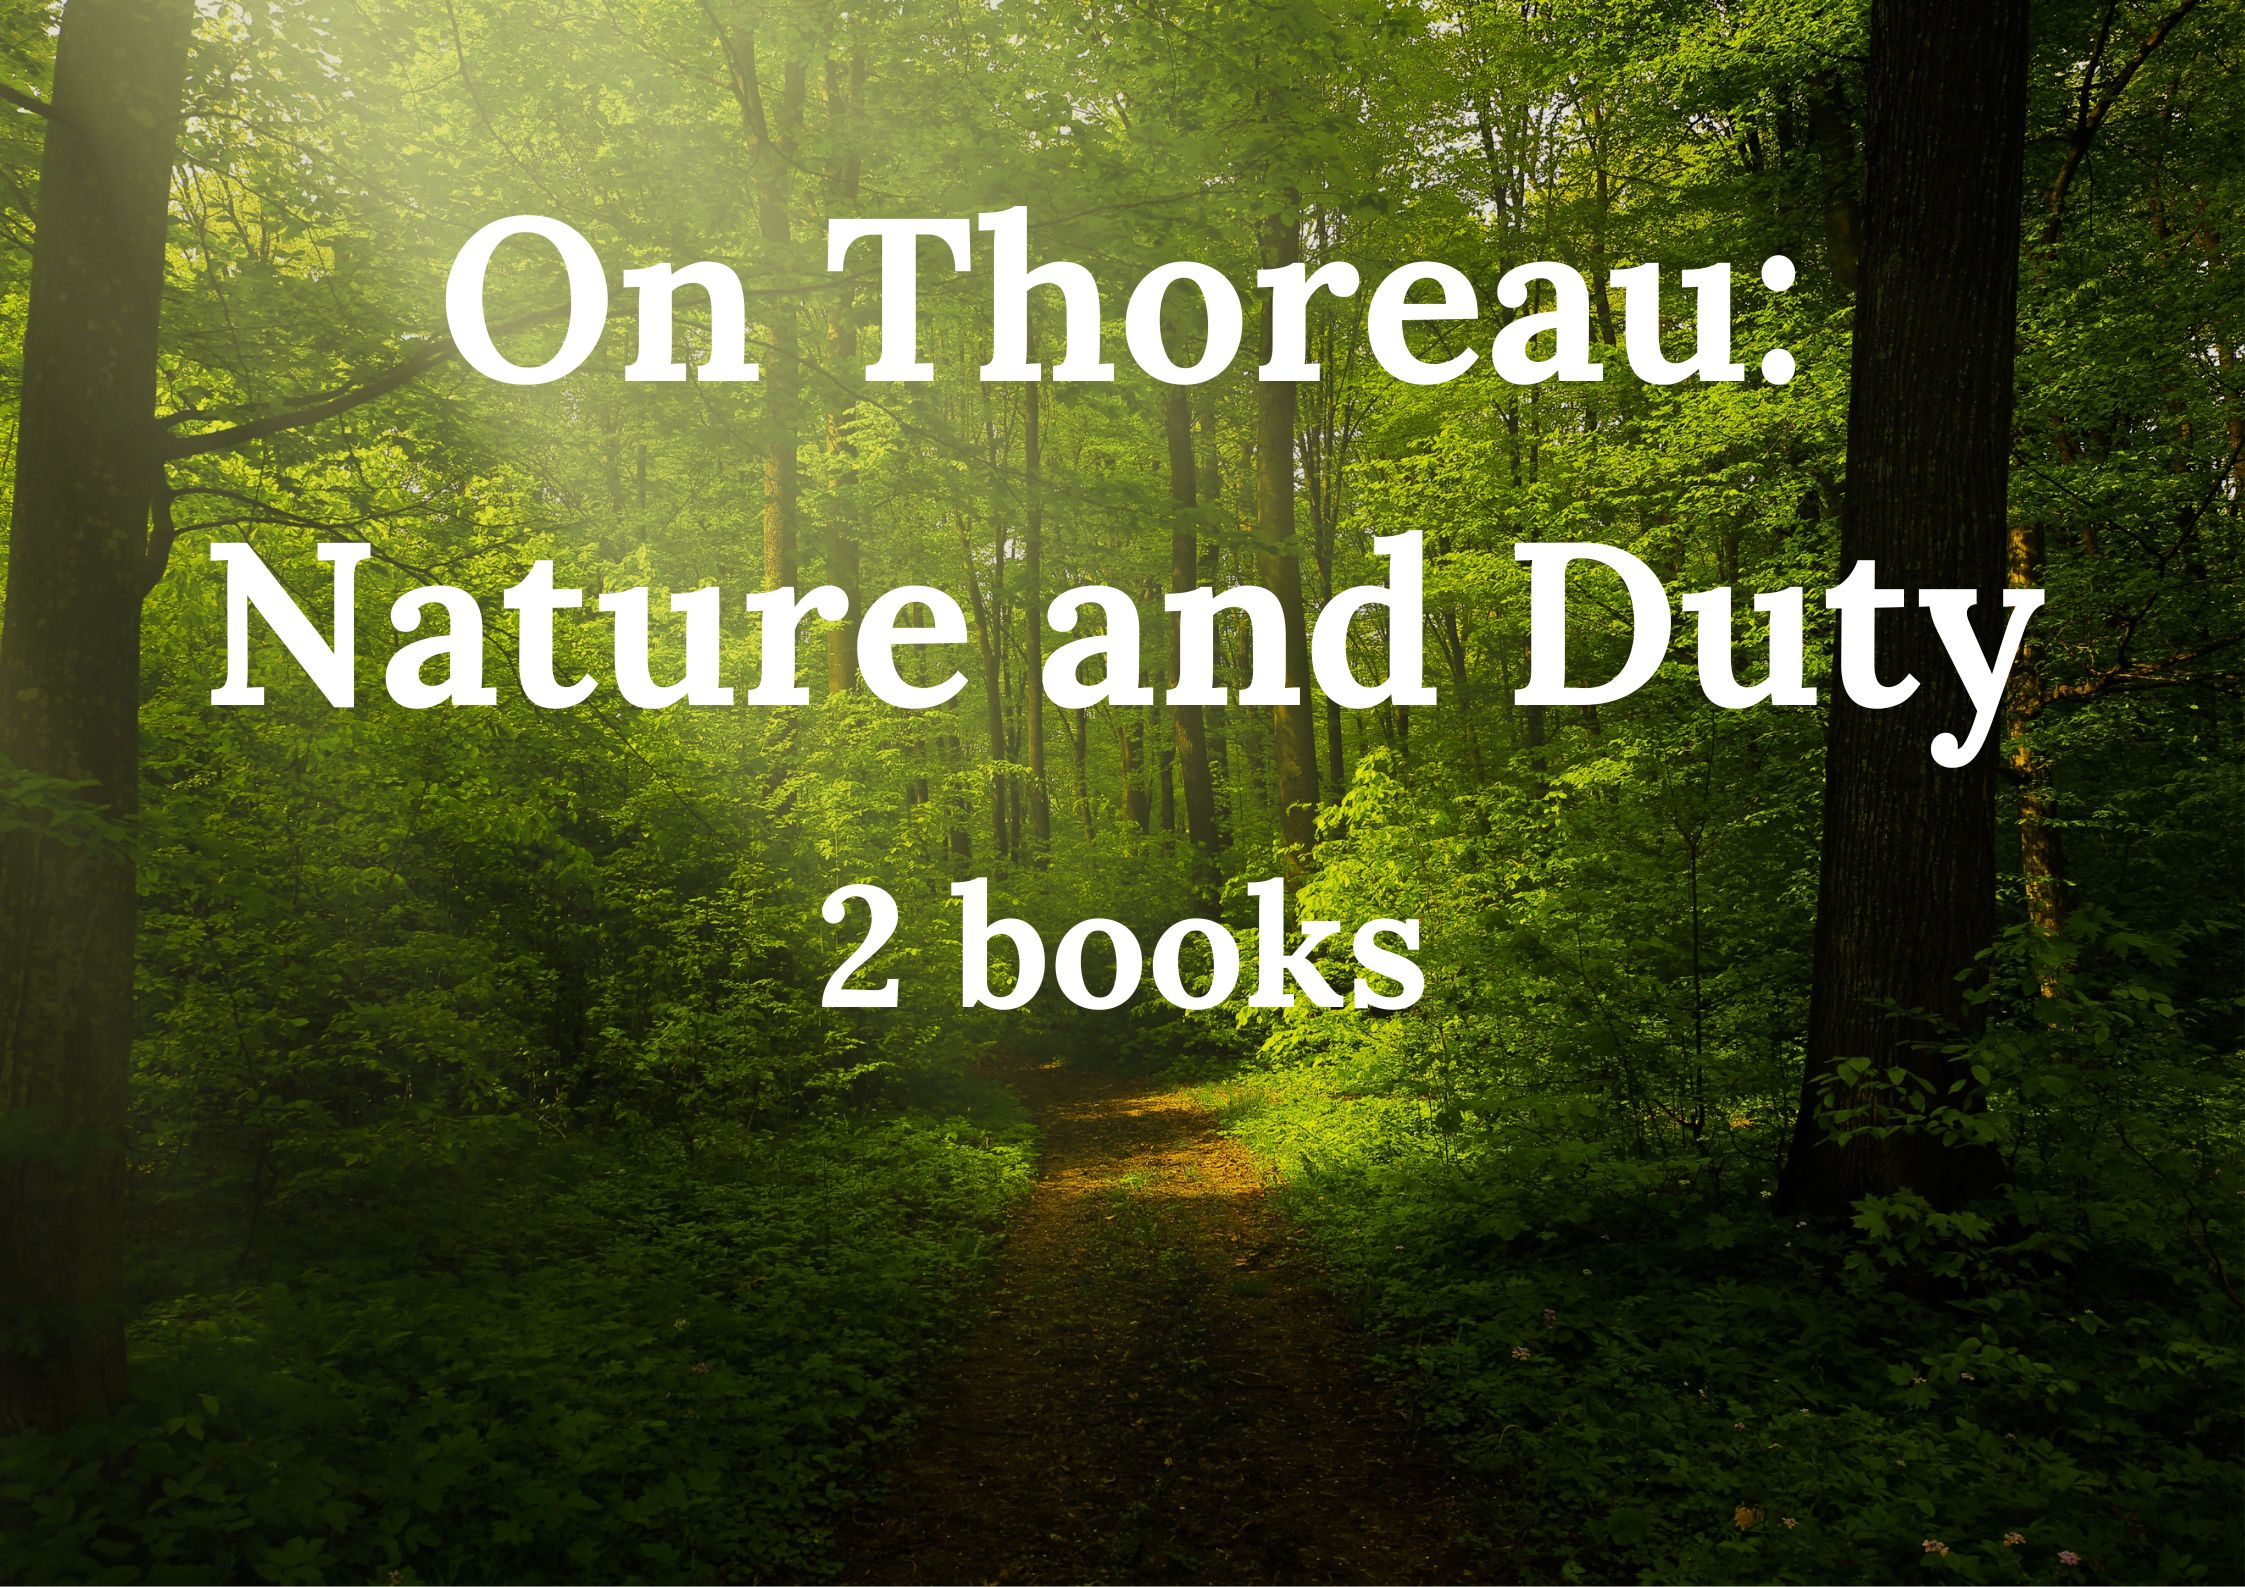 Thoreau’s Civil Disobedience & Why it Matters Today